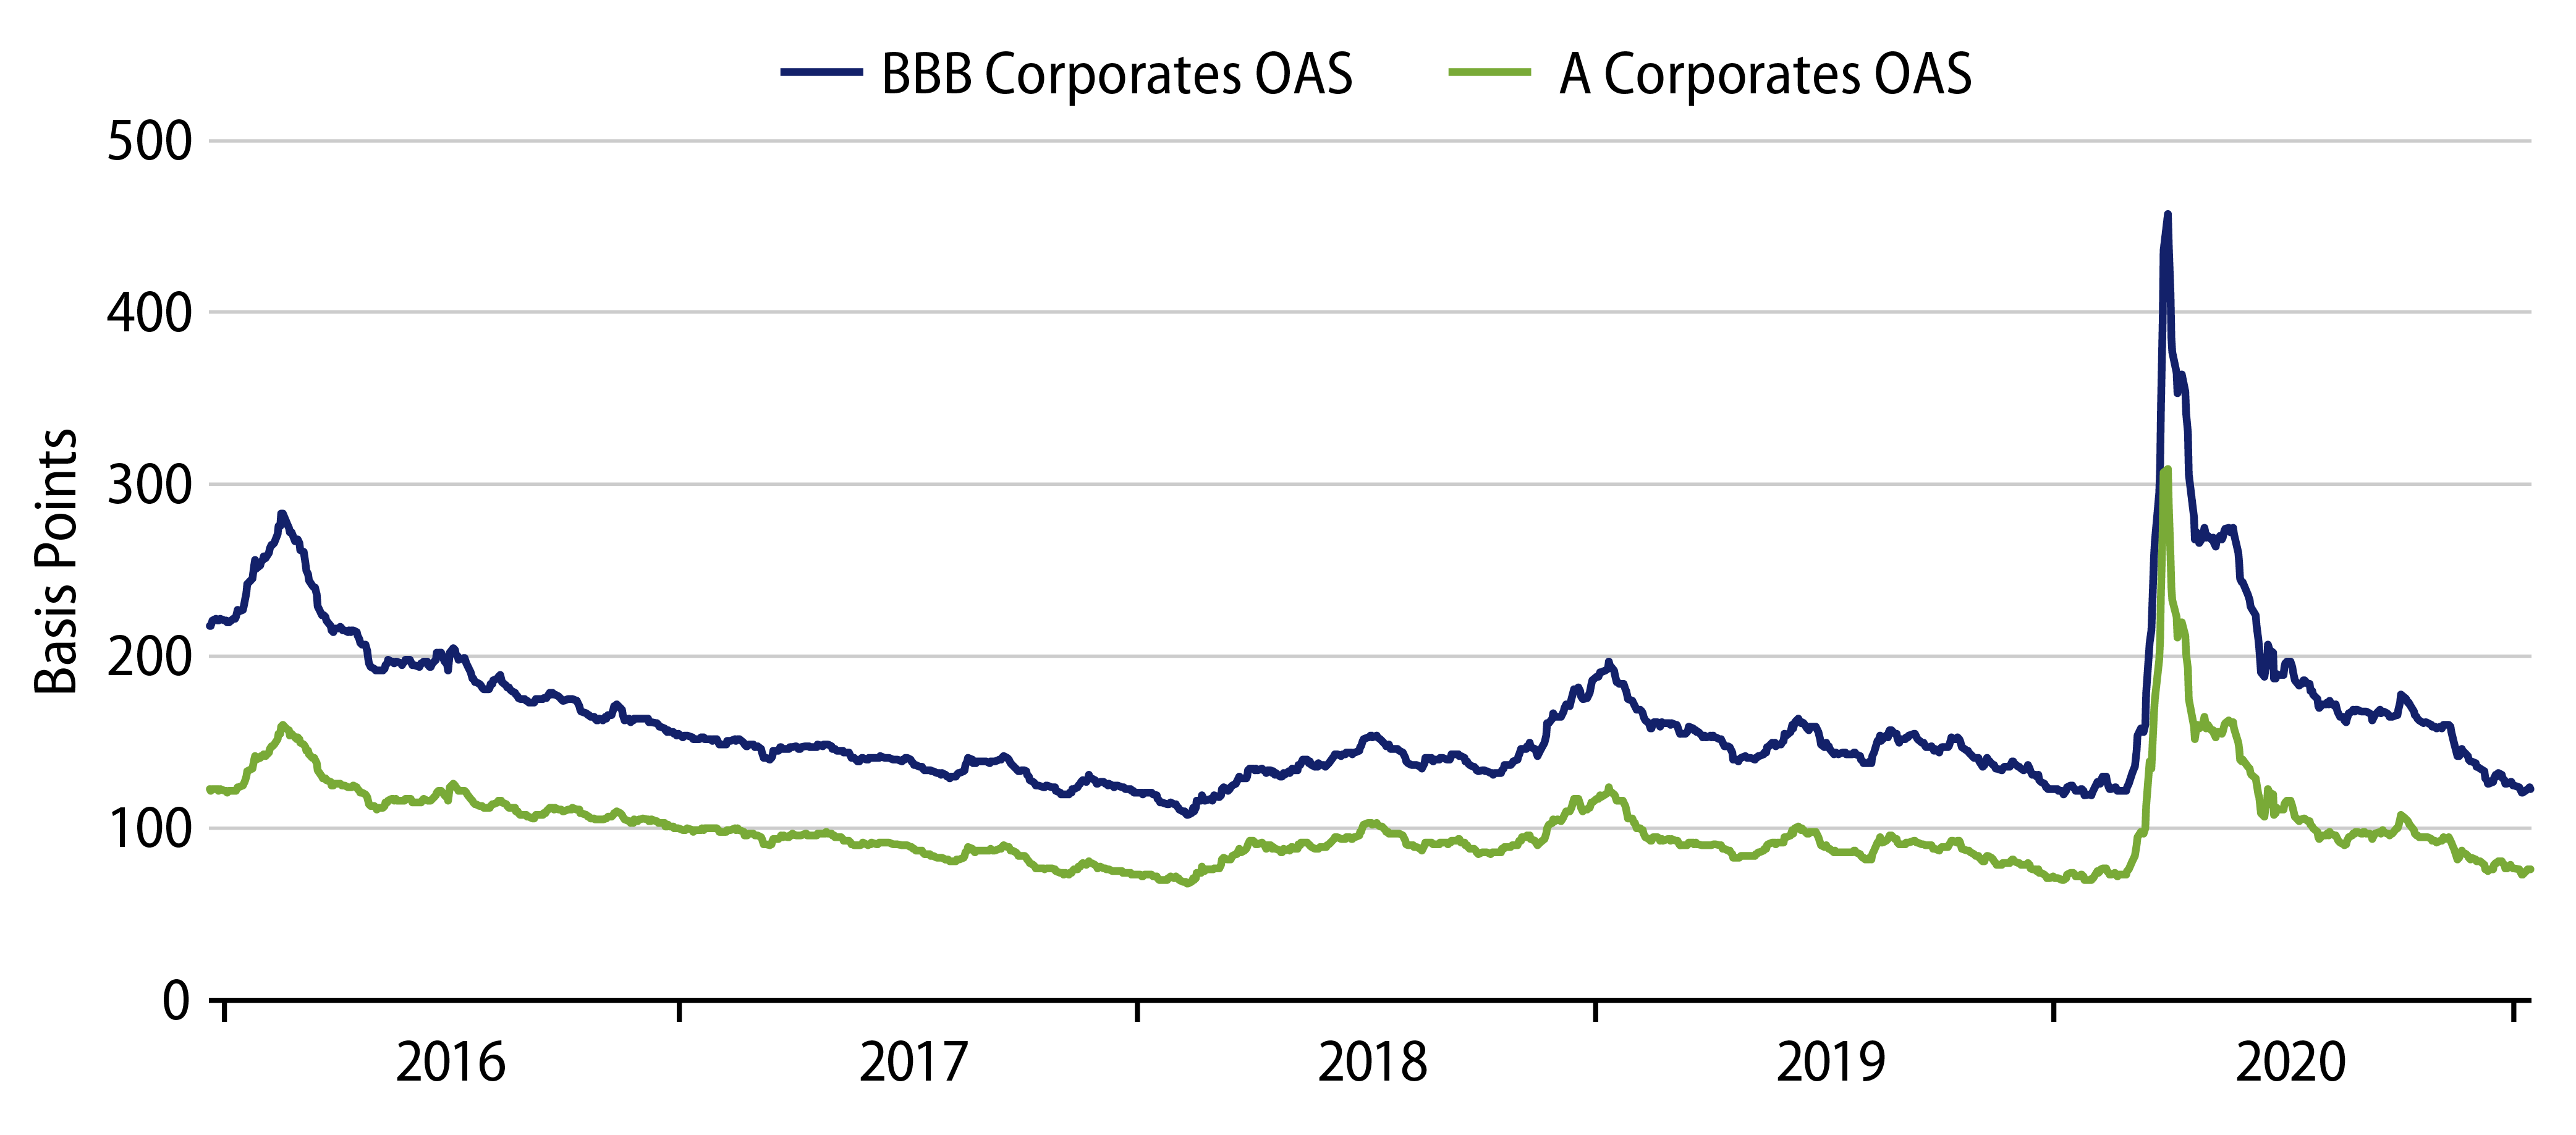 Explore Corporate Spreads Have Largely Retraced Covid-Driven Spread Widening.